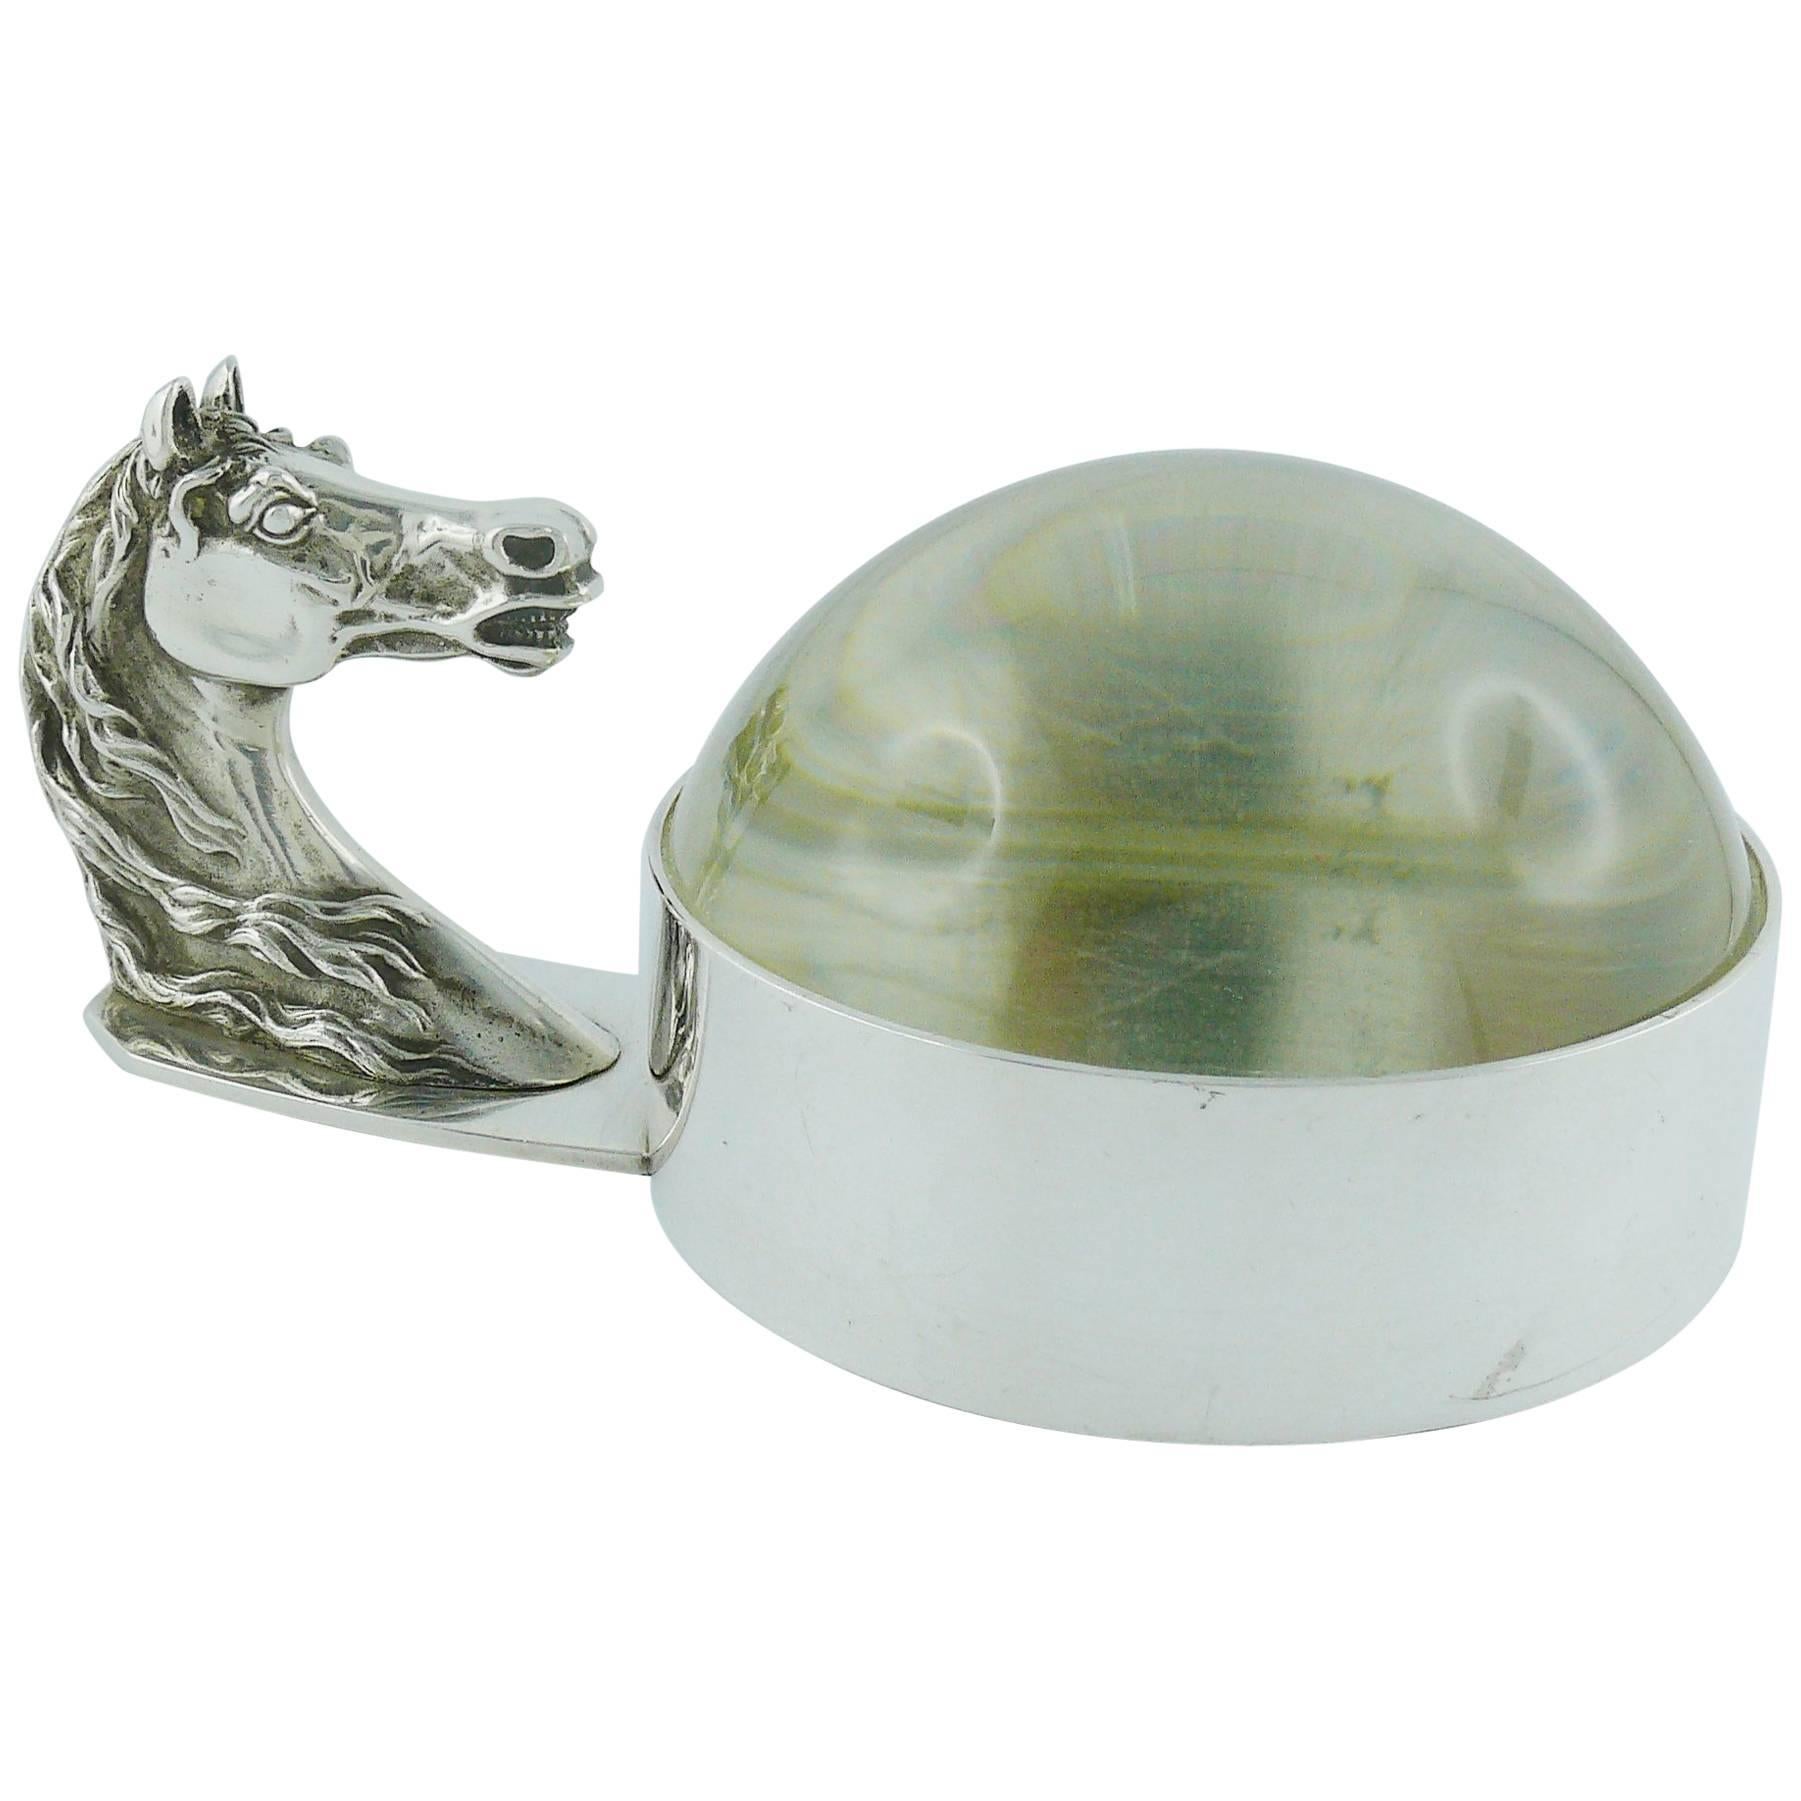 Hermes Vintage Equestrian Silver Plated Desk Paperweight Magnifier